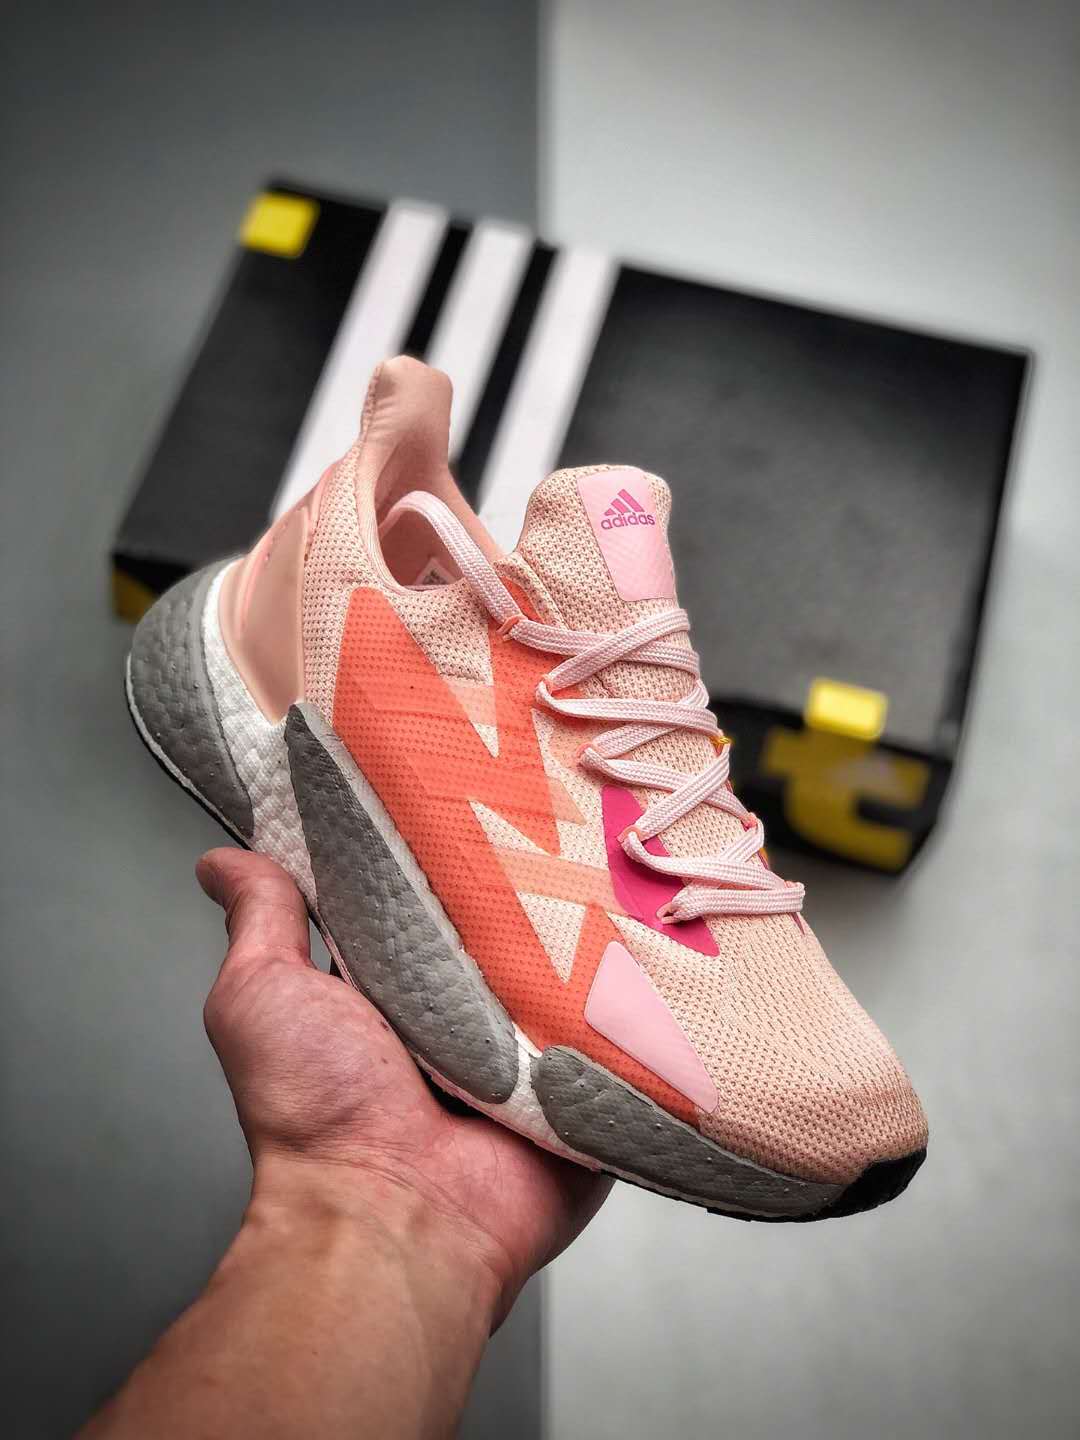 Adidas X9000L4 'Light Pink' FW8407 - Stylish and Comfortable Athletic Shoes